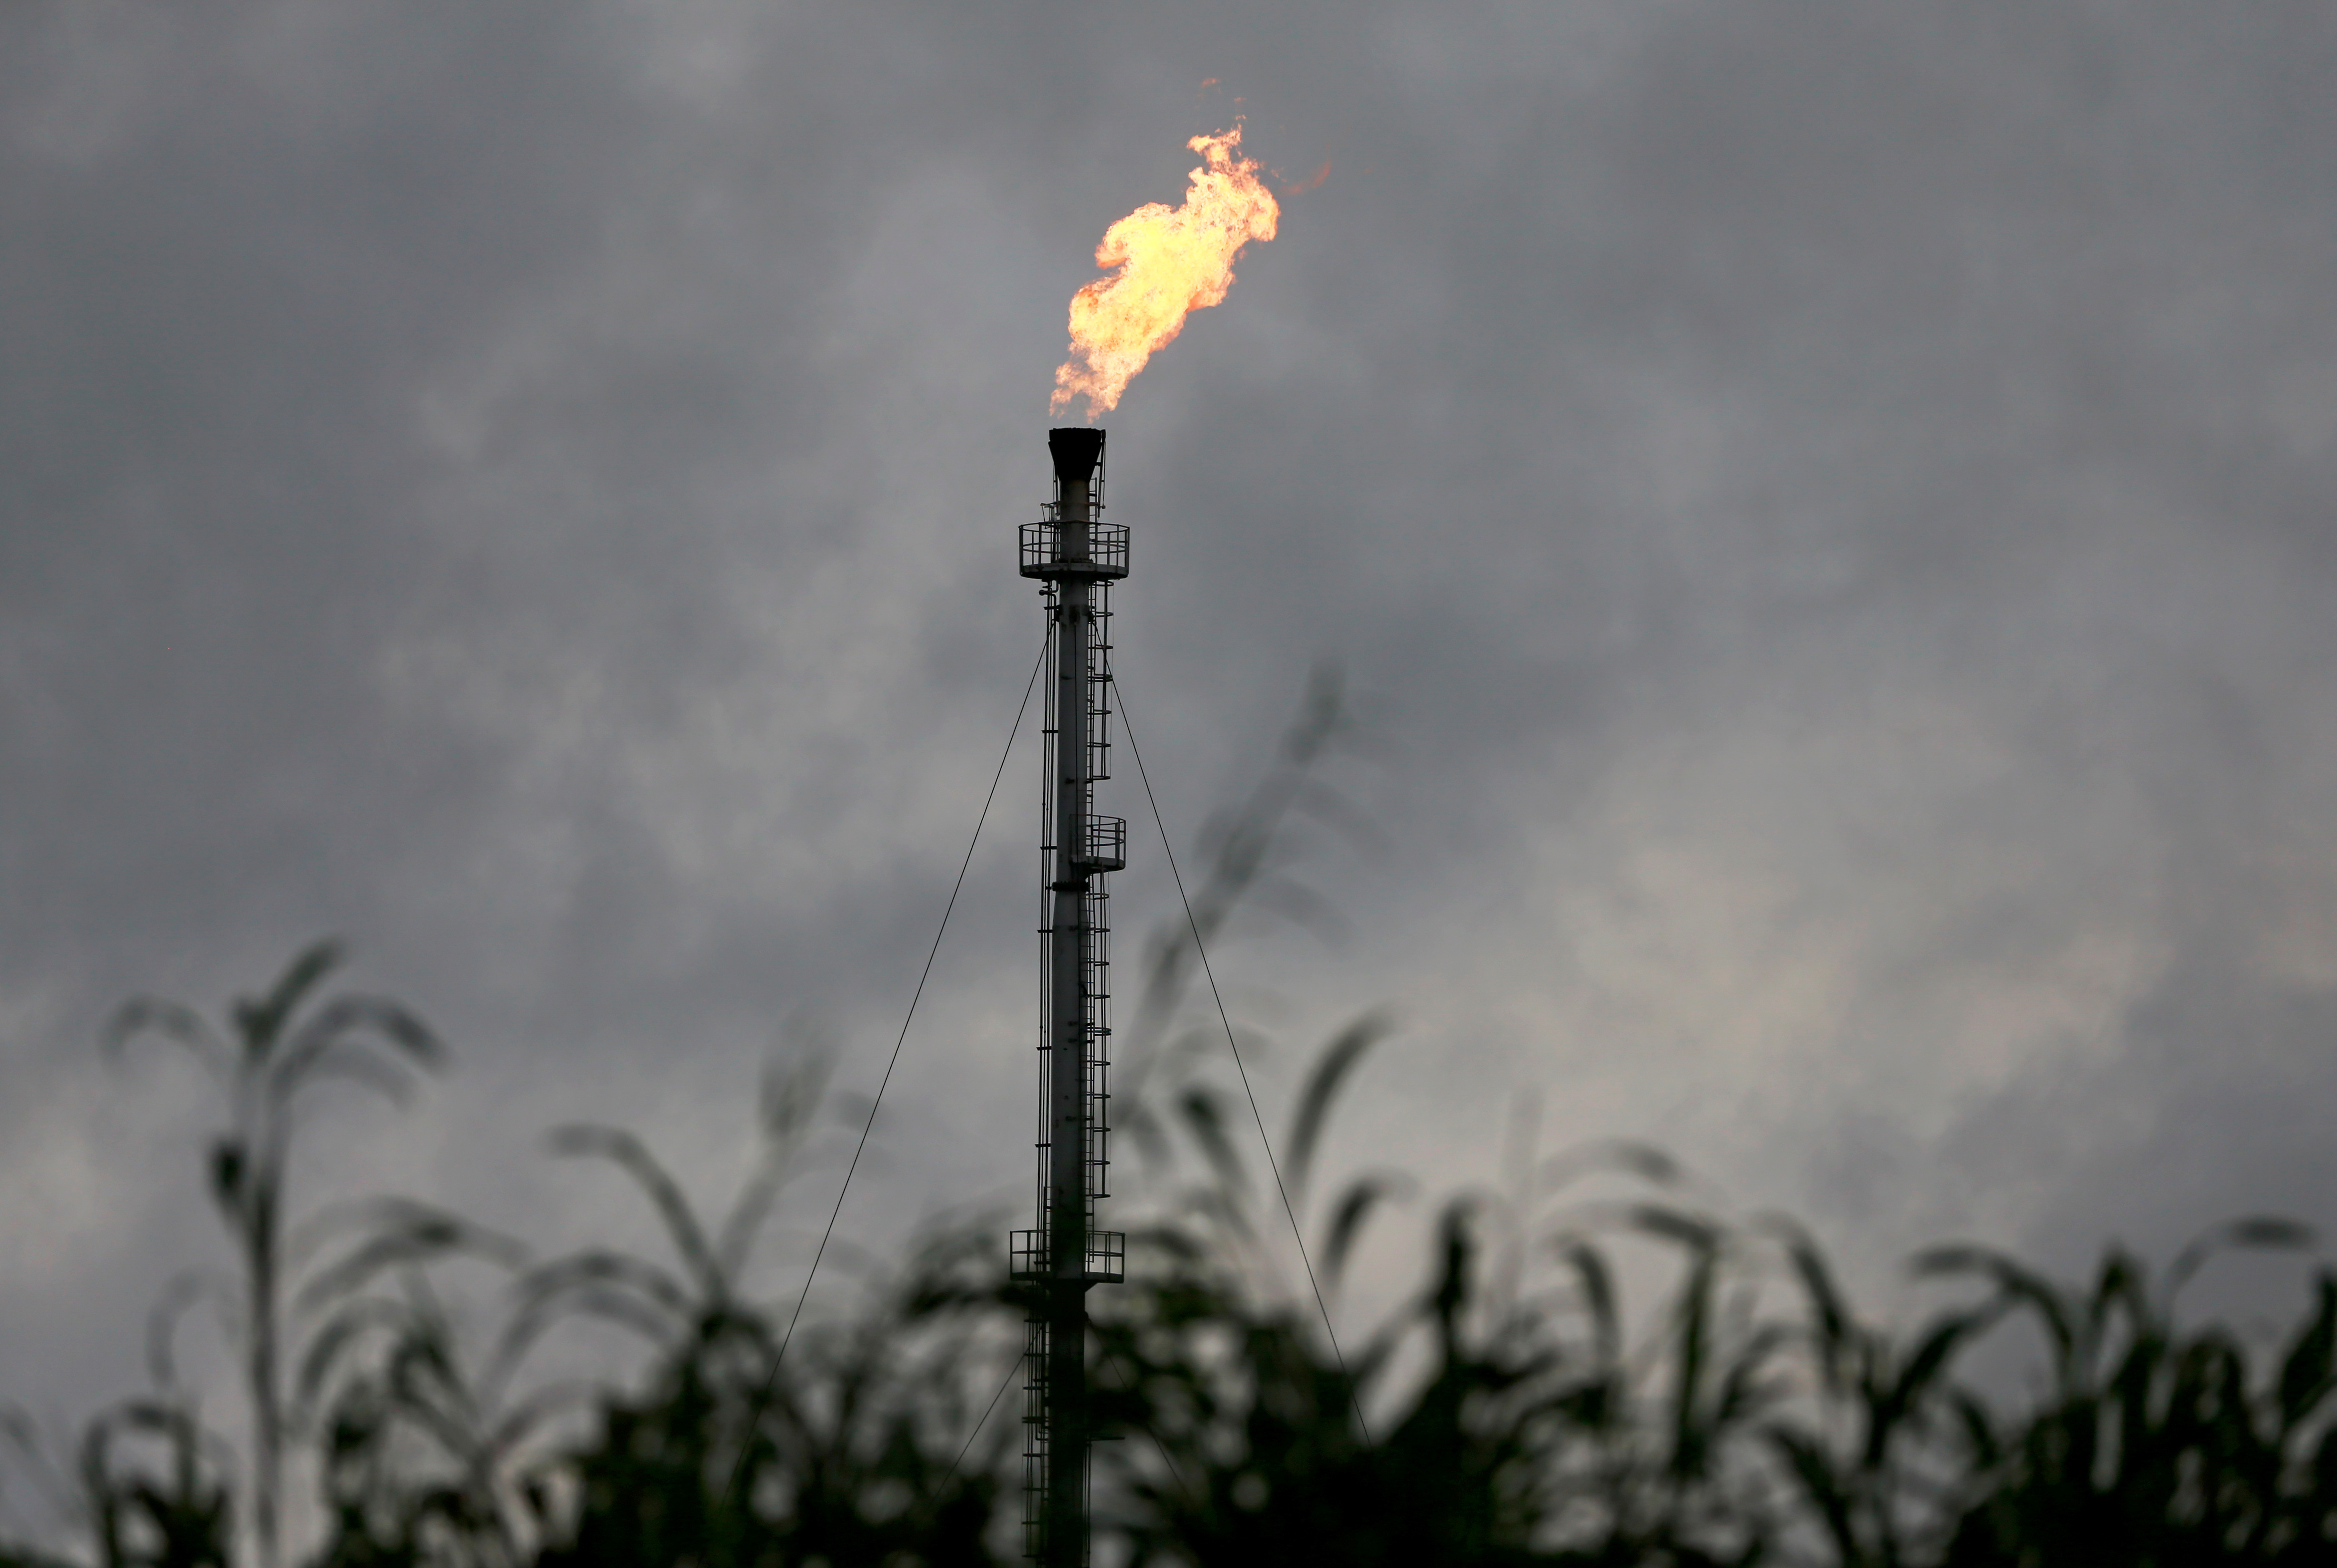 A vertical gas flaring furnace is seen in Ughelli, Delta State.